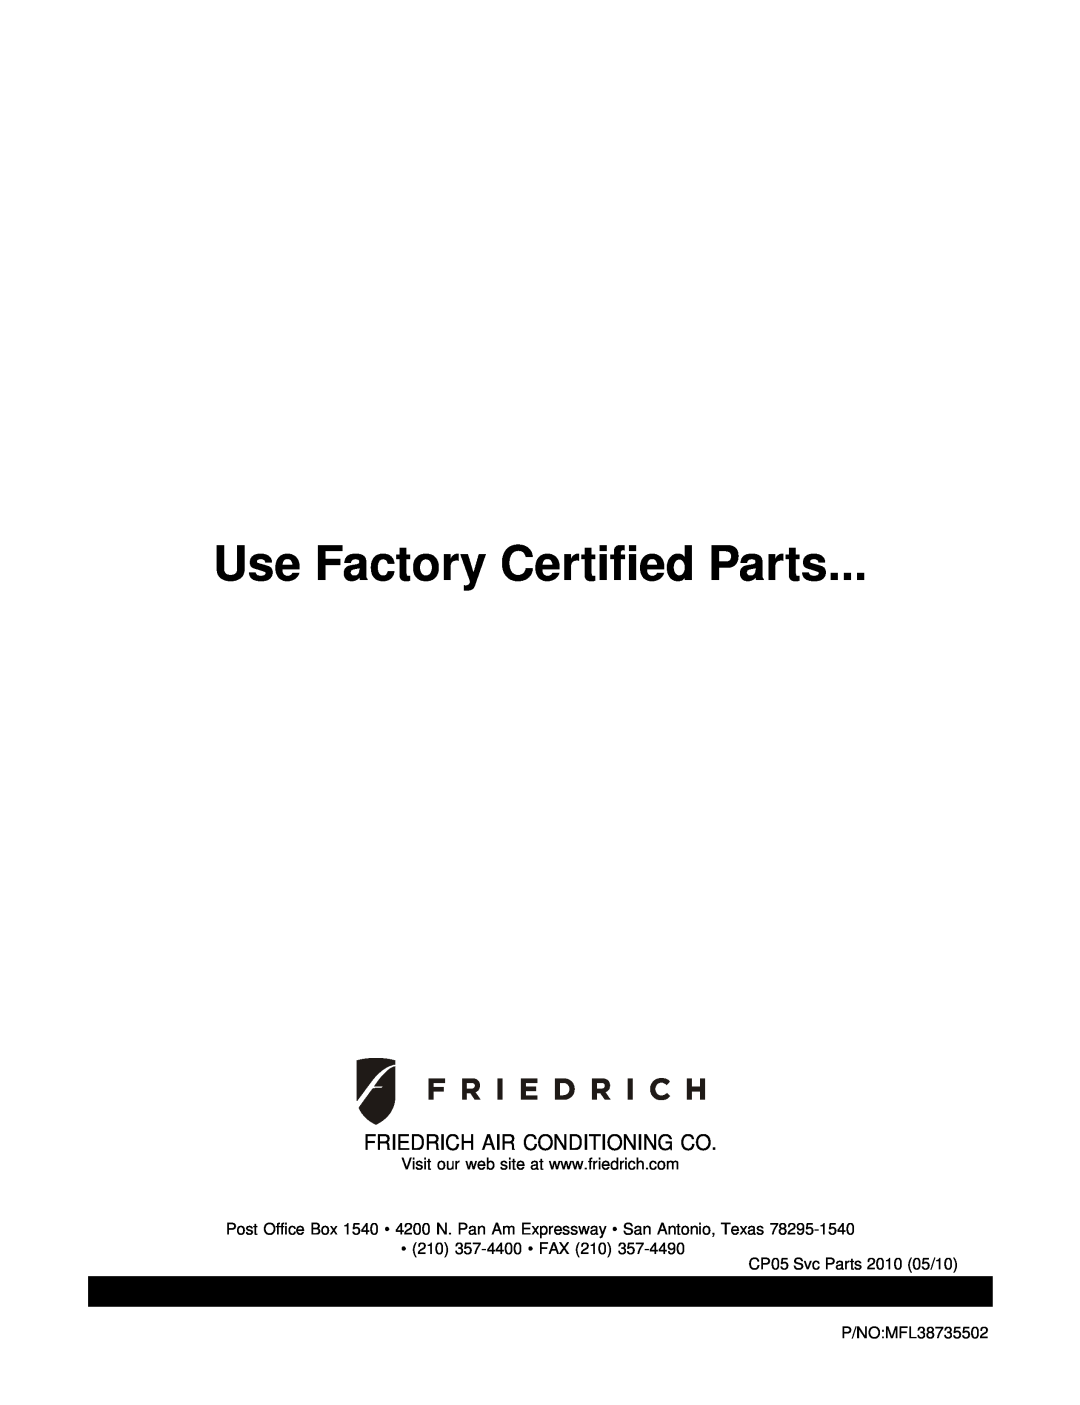 Friedrich CP05N10A manual Use Factory Certified Parts, Friedrich Air Conditioning Co, P/NO MFL38735502 